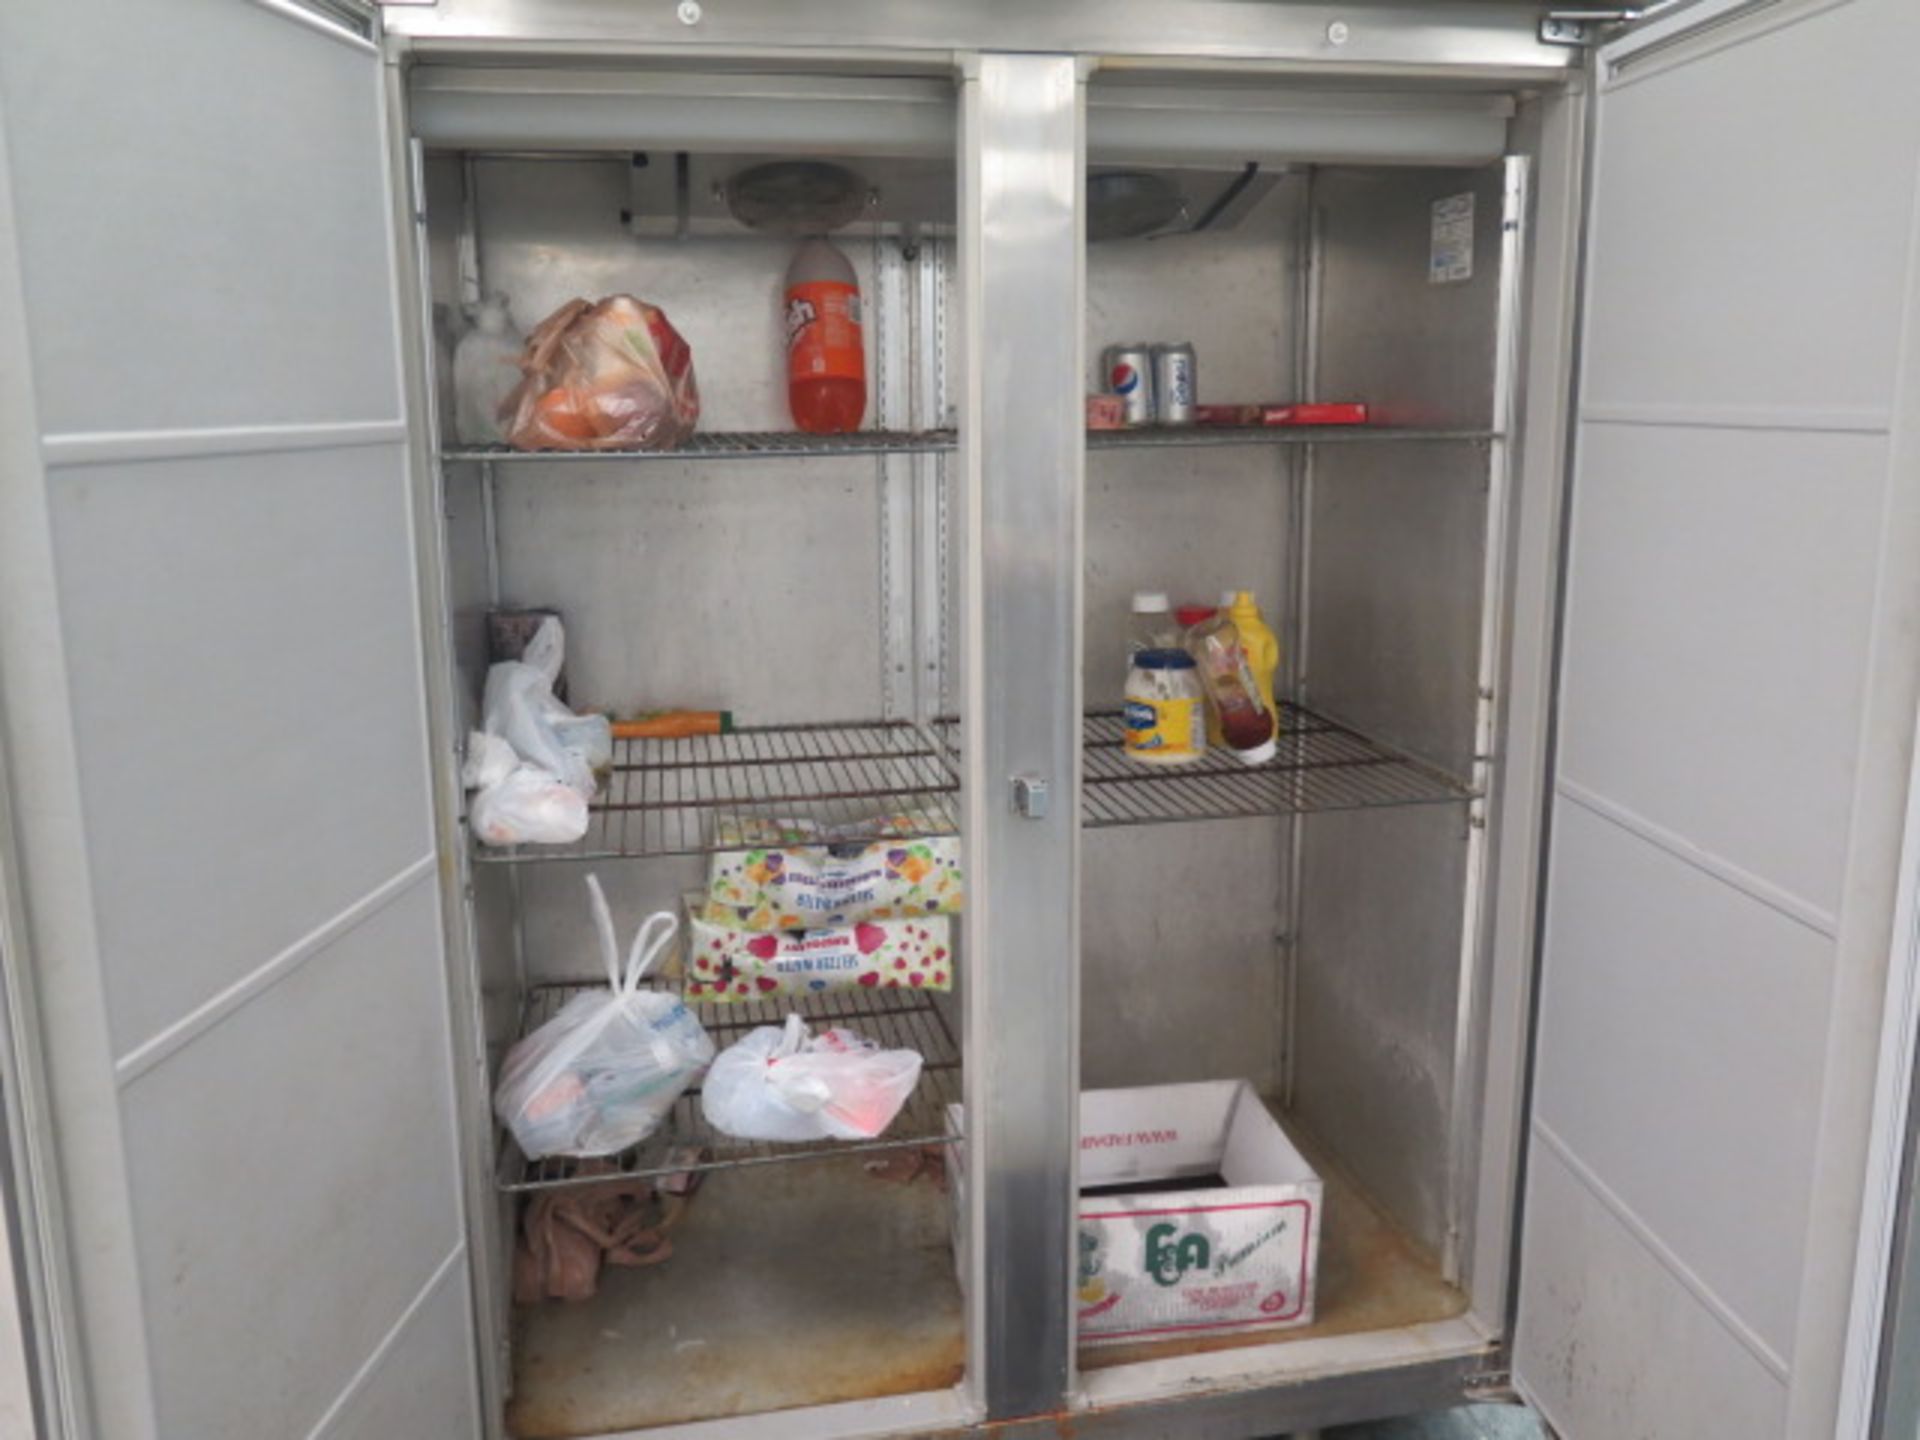 Industrial Stainless Steel Refrigerator - Image 4 of 4